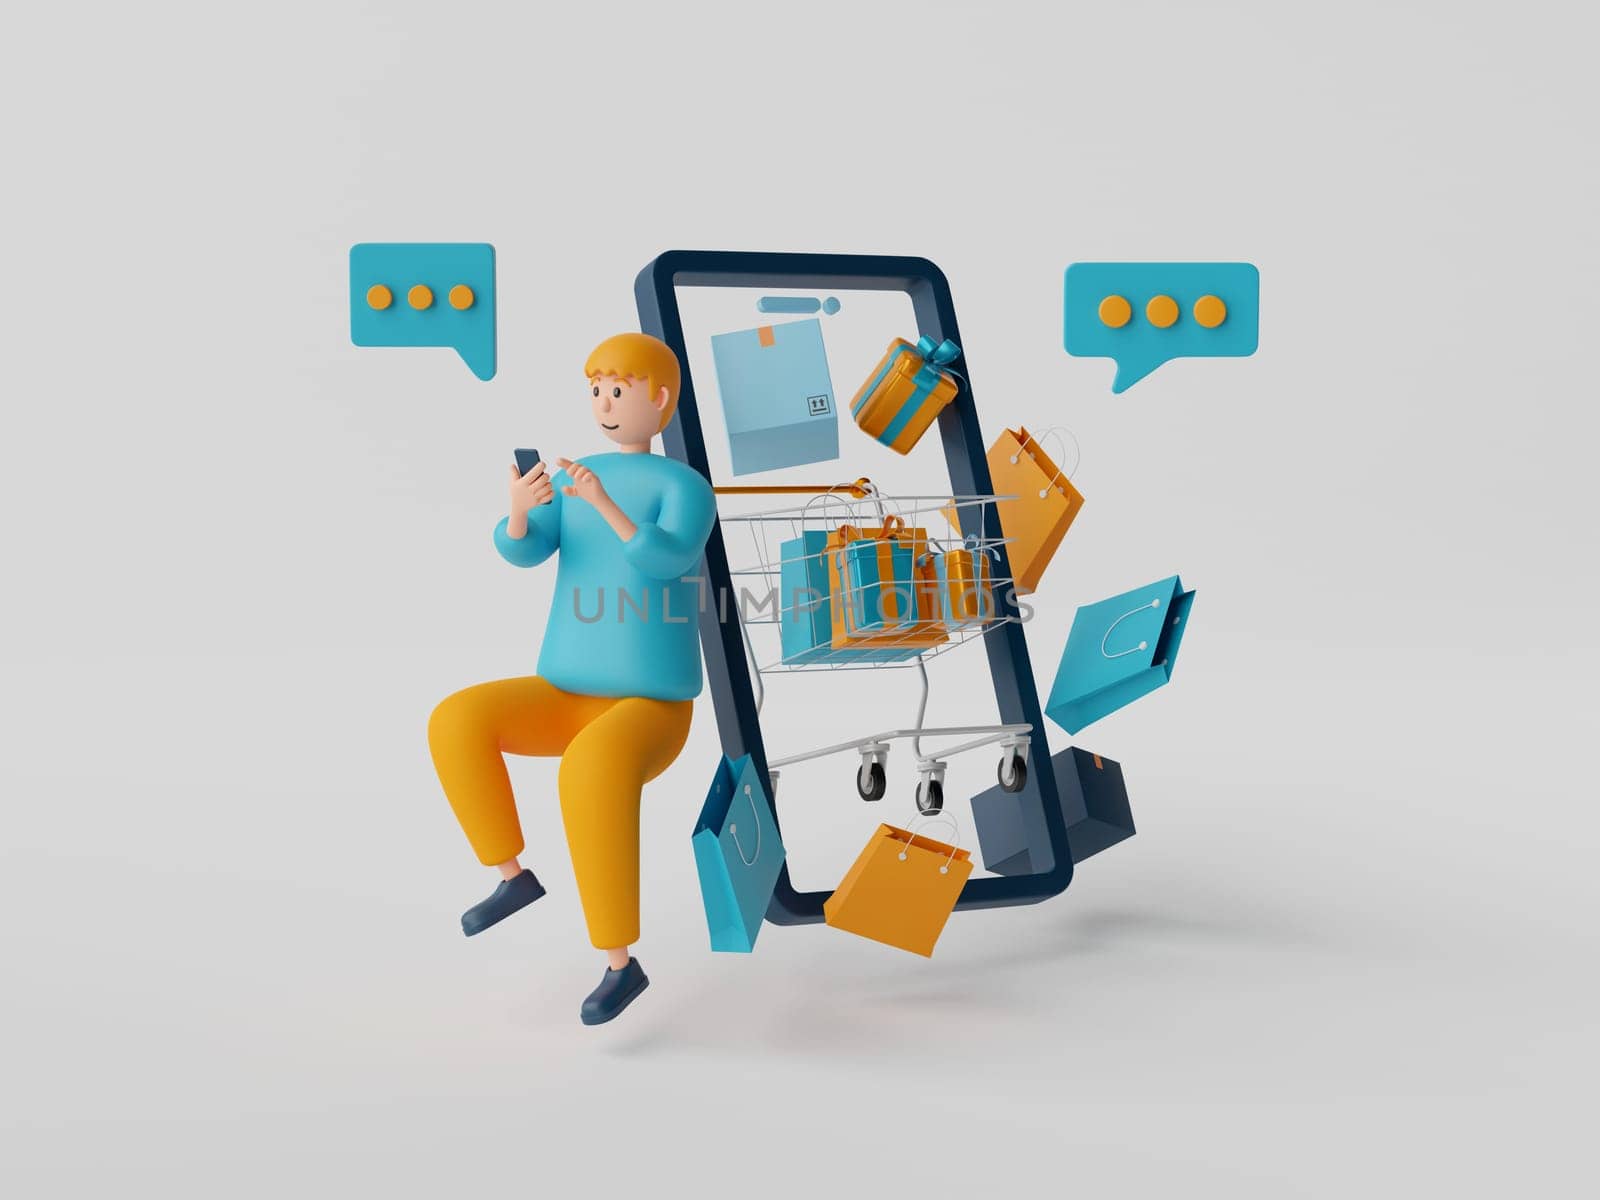 3d illustration of a man shopping online via application on smartphone with shopping item. by nutzchotwarut